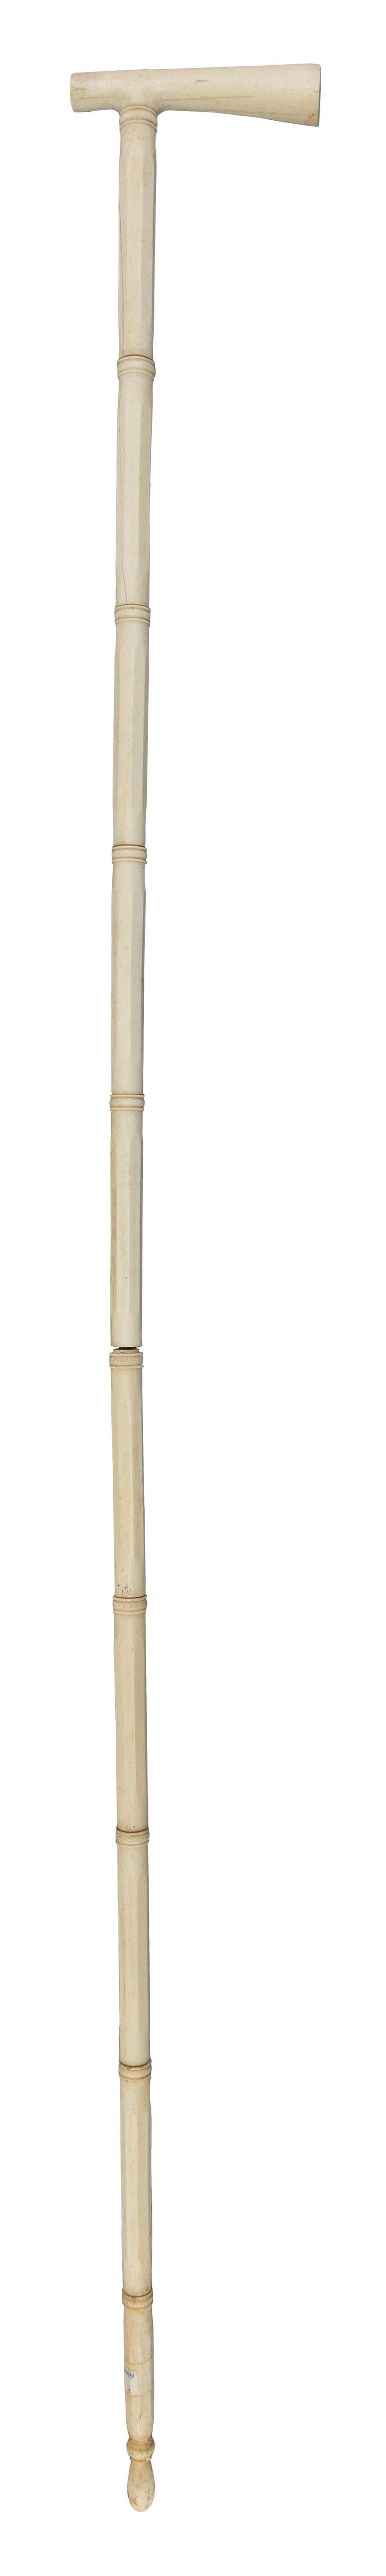 CARVED IVORY TWO PART CANE 19TH 2f1191